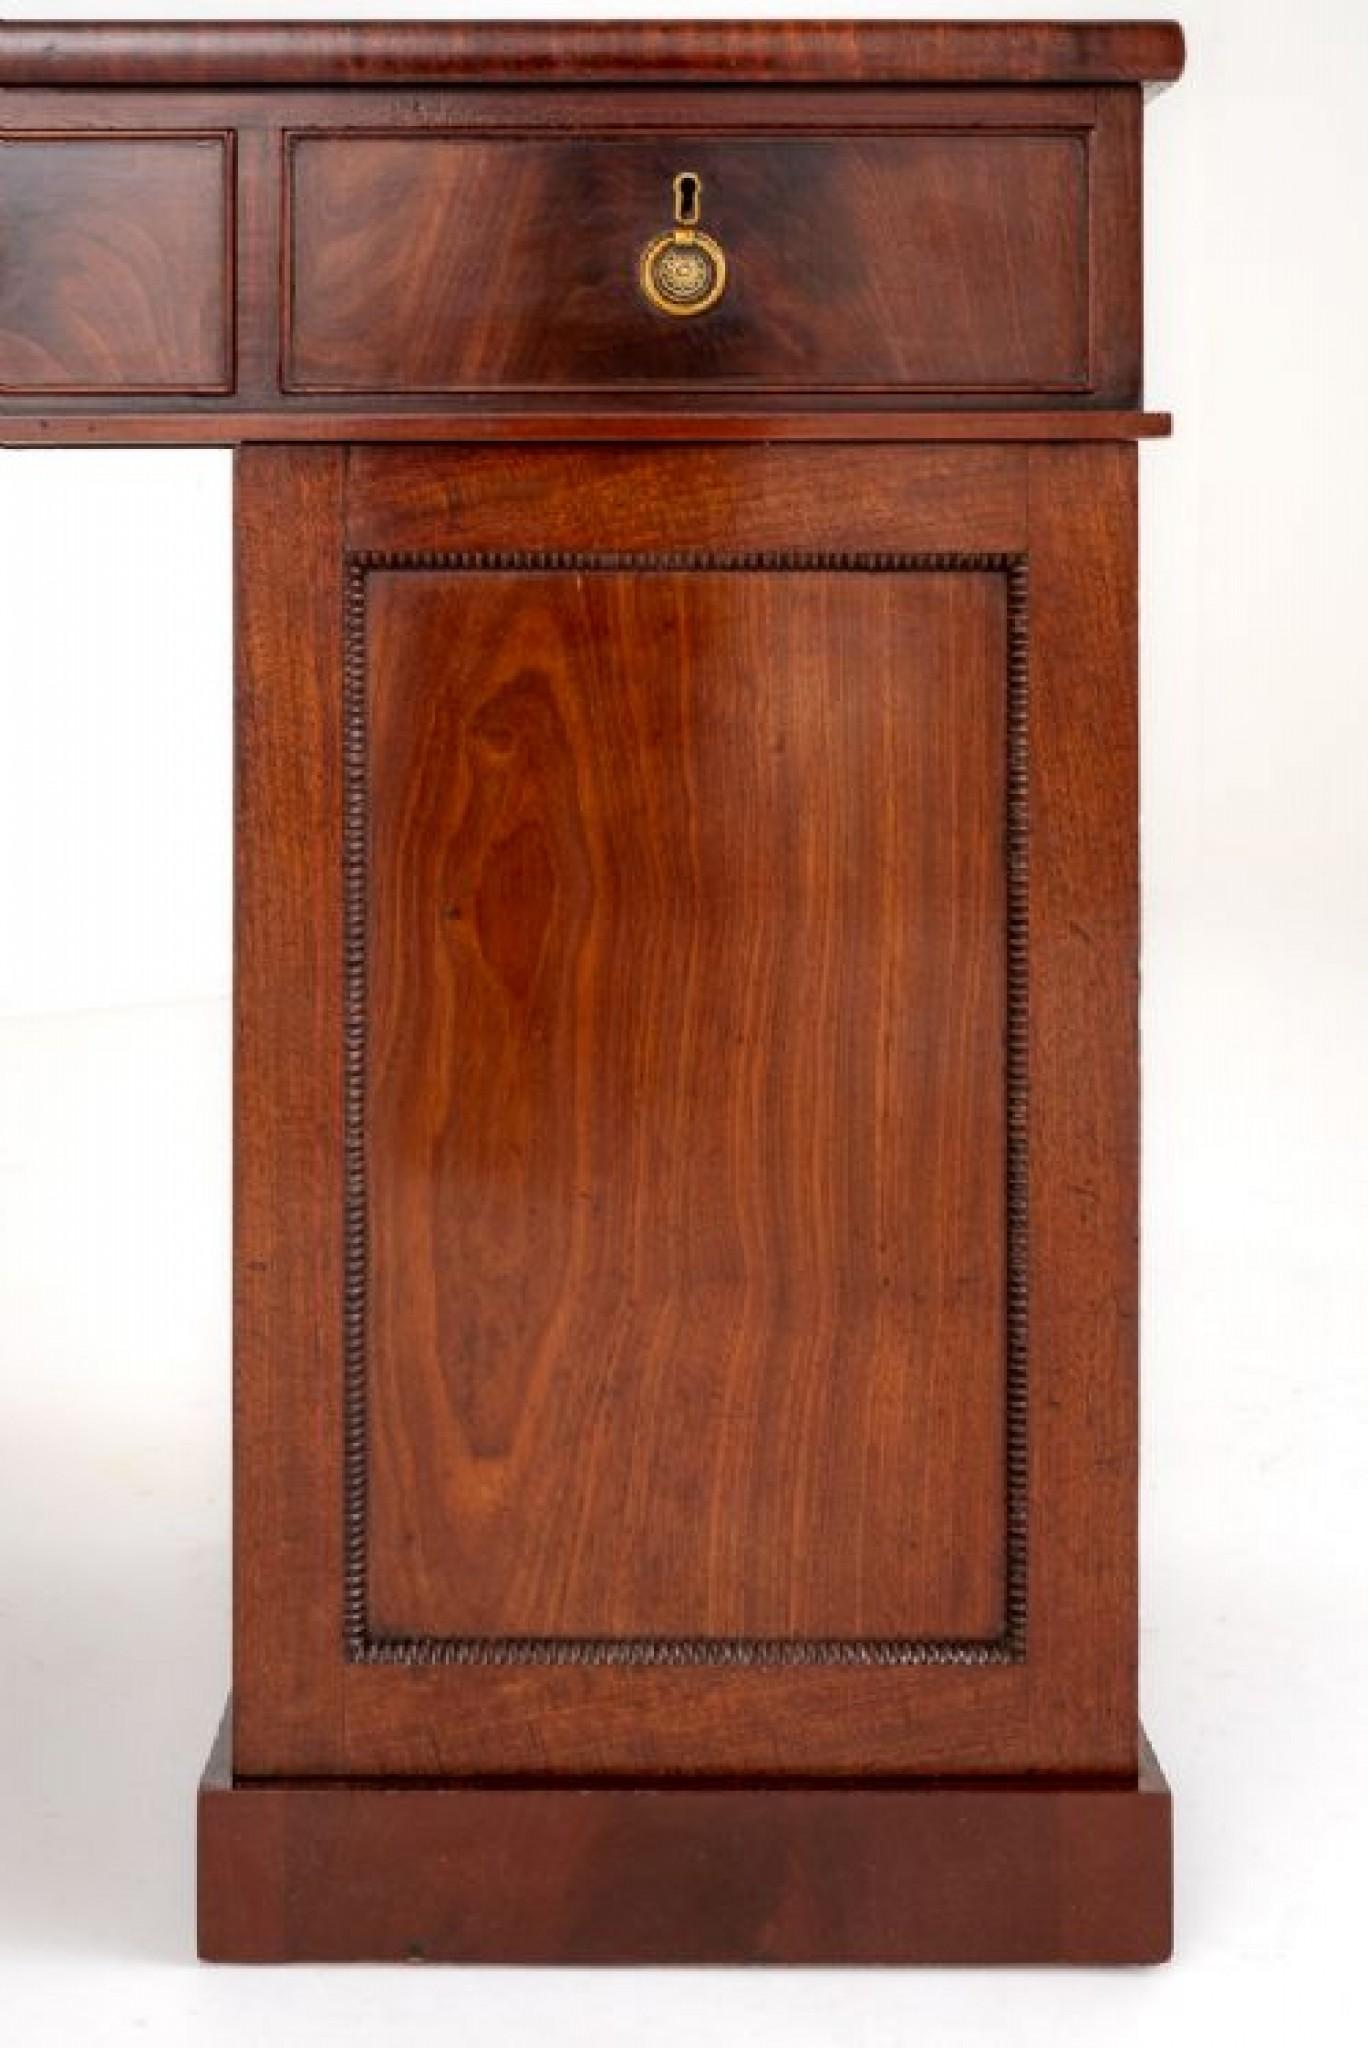 Regency Mahogany Sideboard.
This Sideboard Being of a Plain Form.
Standing Upon a Plinth Base.
The Sideboard Features 2 Panelled Doors Which Open to Reveal a Shelved Interior, 3 Oak Lined Drawers (note the fine dovetails) With Ring Pull Handles.
The